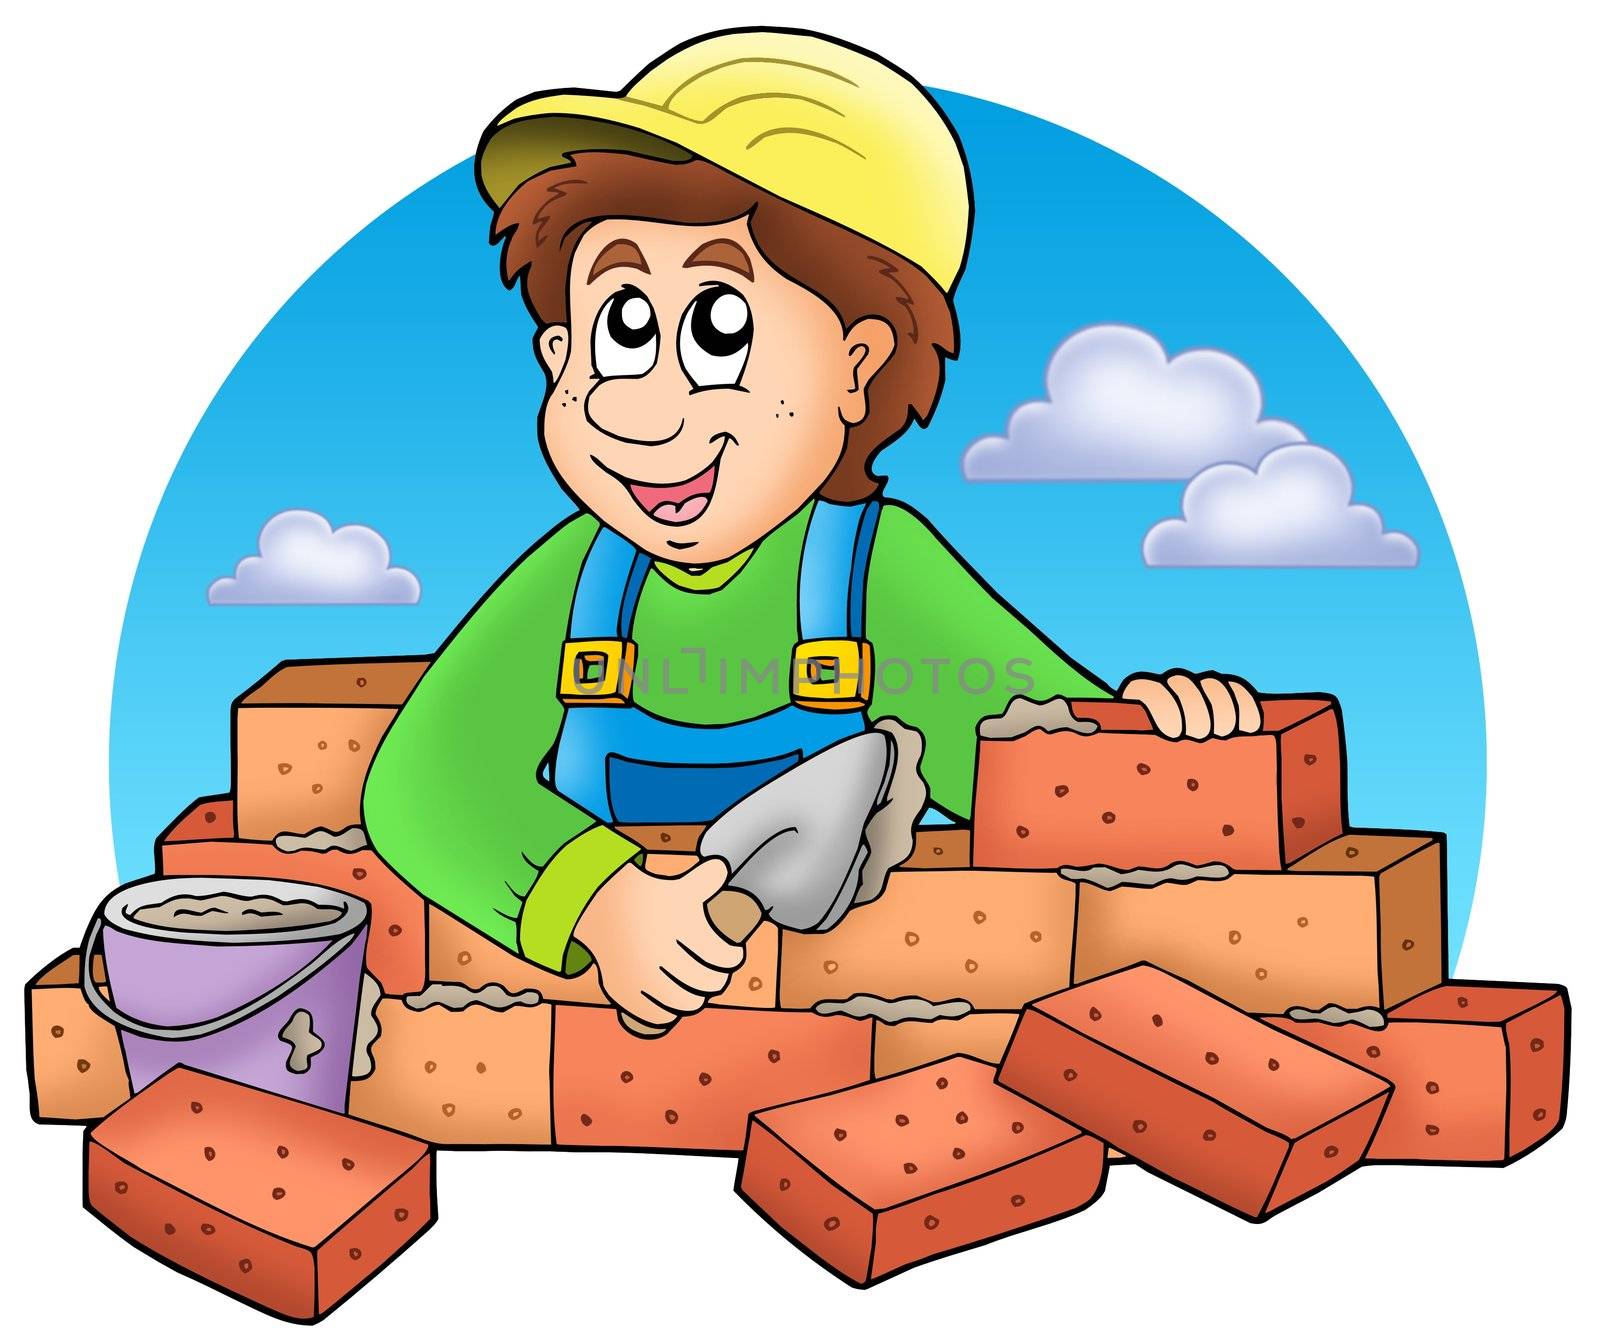 Cartoon bricklayer with clouds - color illustration.